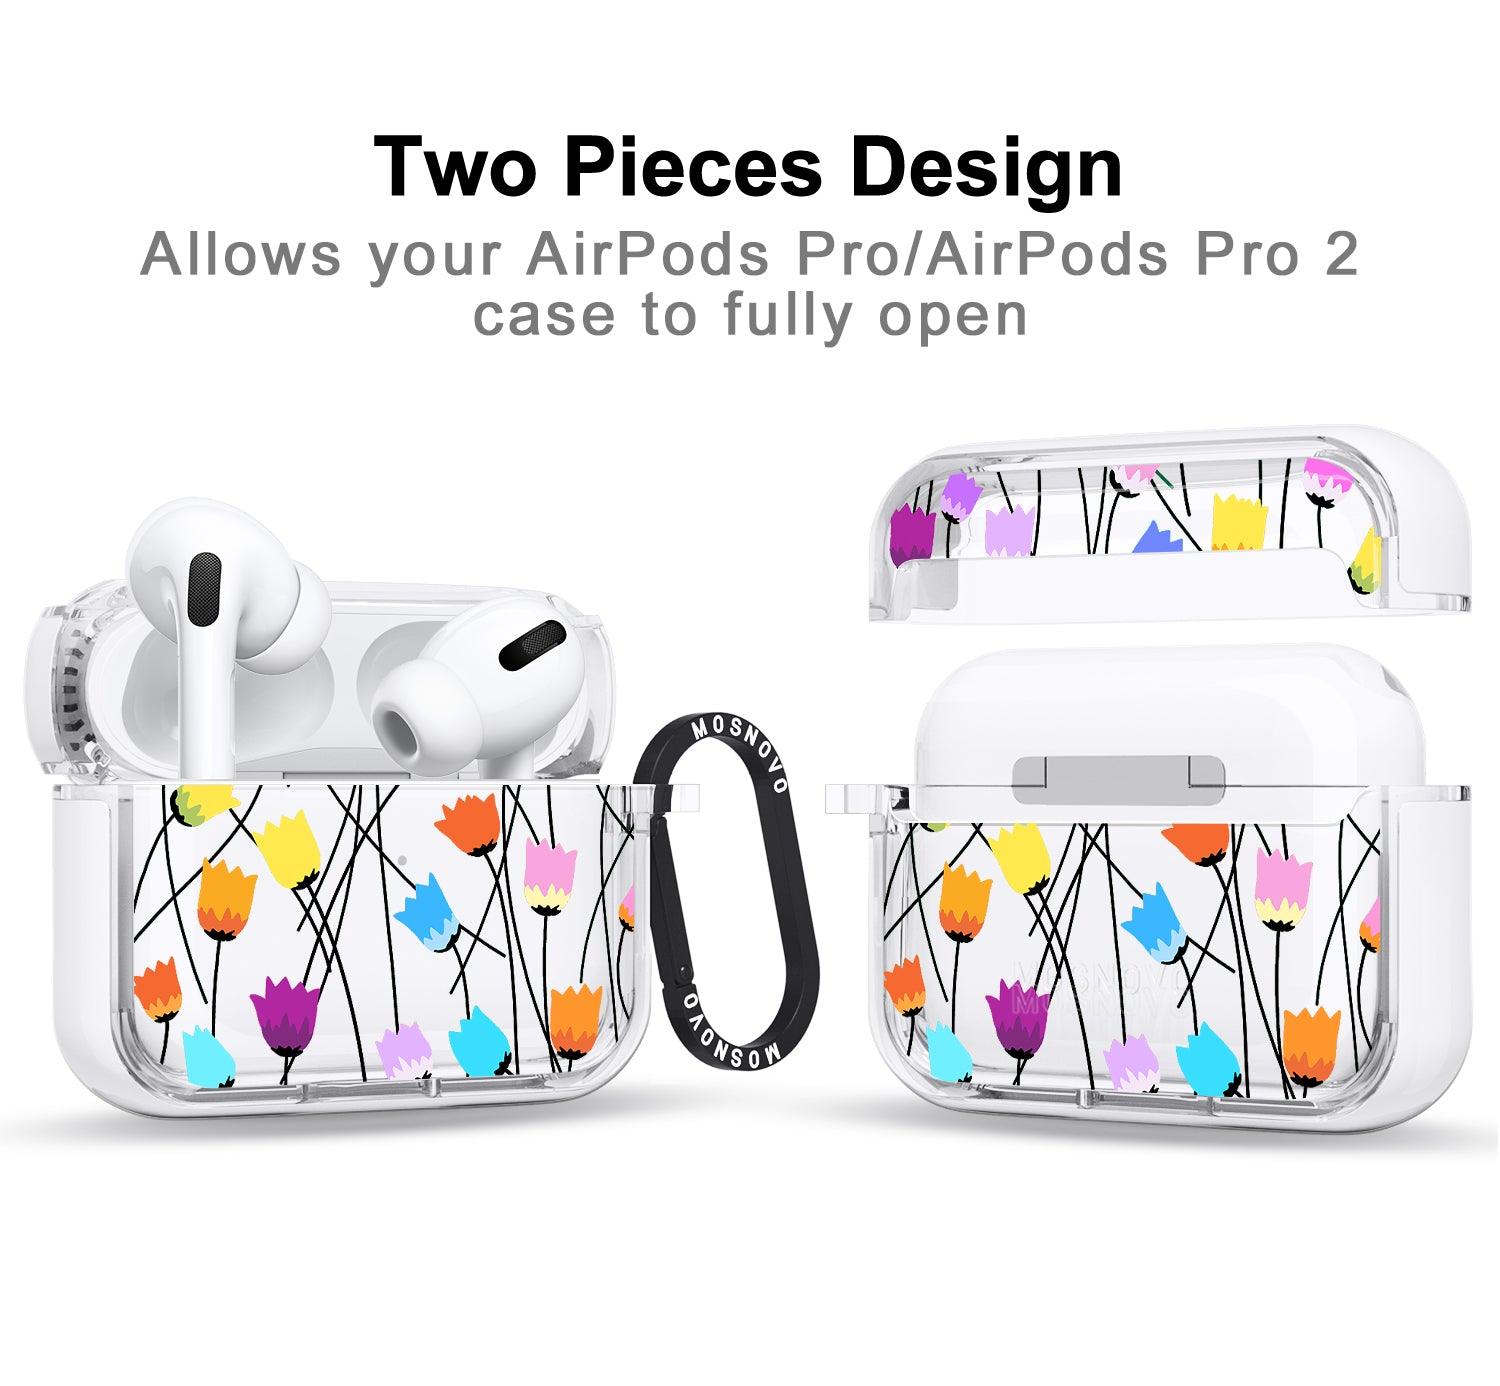 Tulips Bloom Floral AirPods Pro 2 Case (2nd Generation) - MOSNOVO